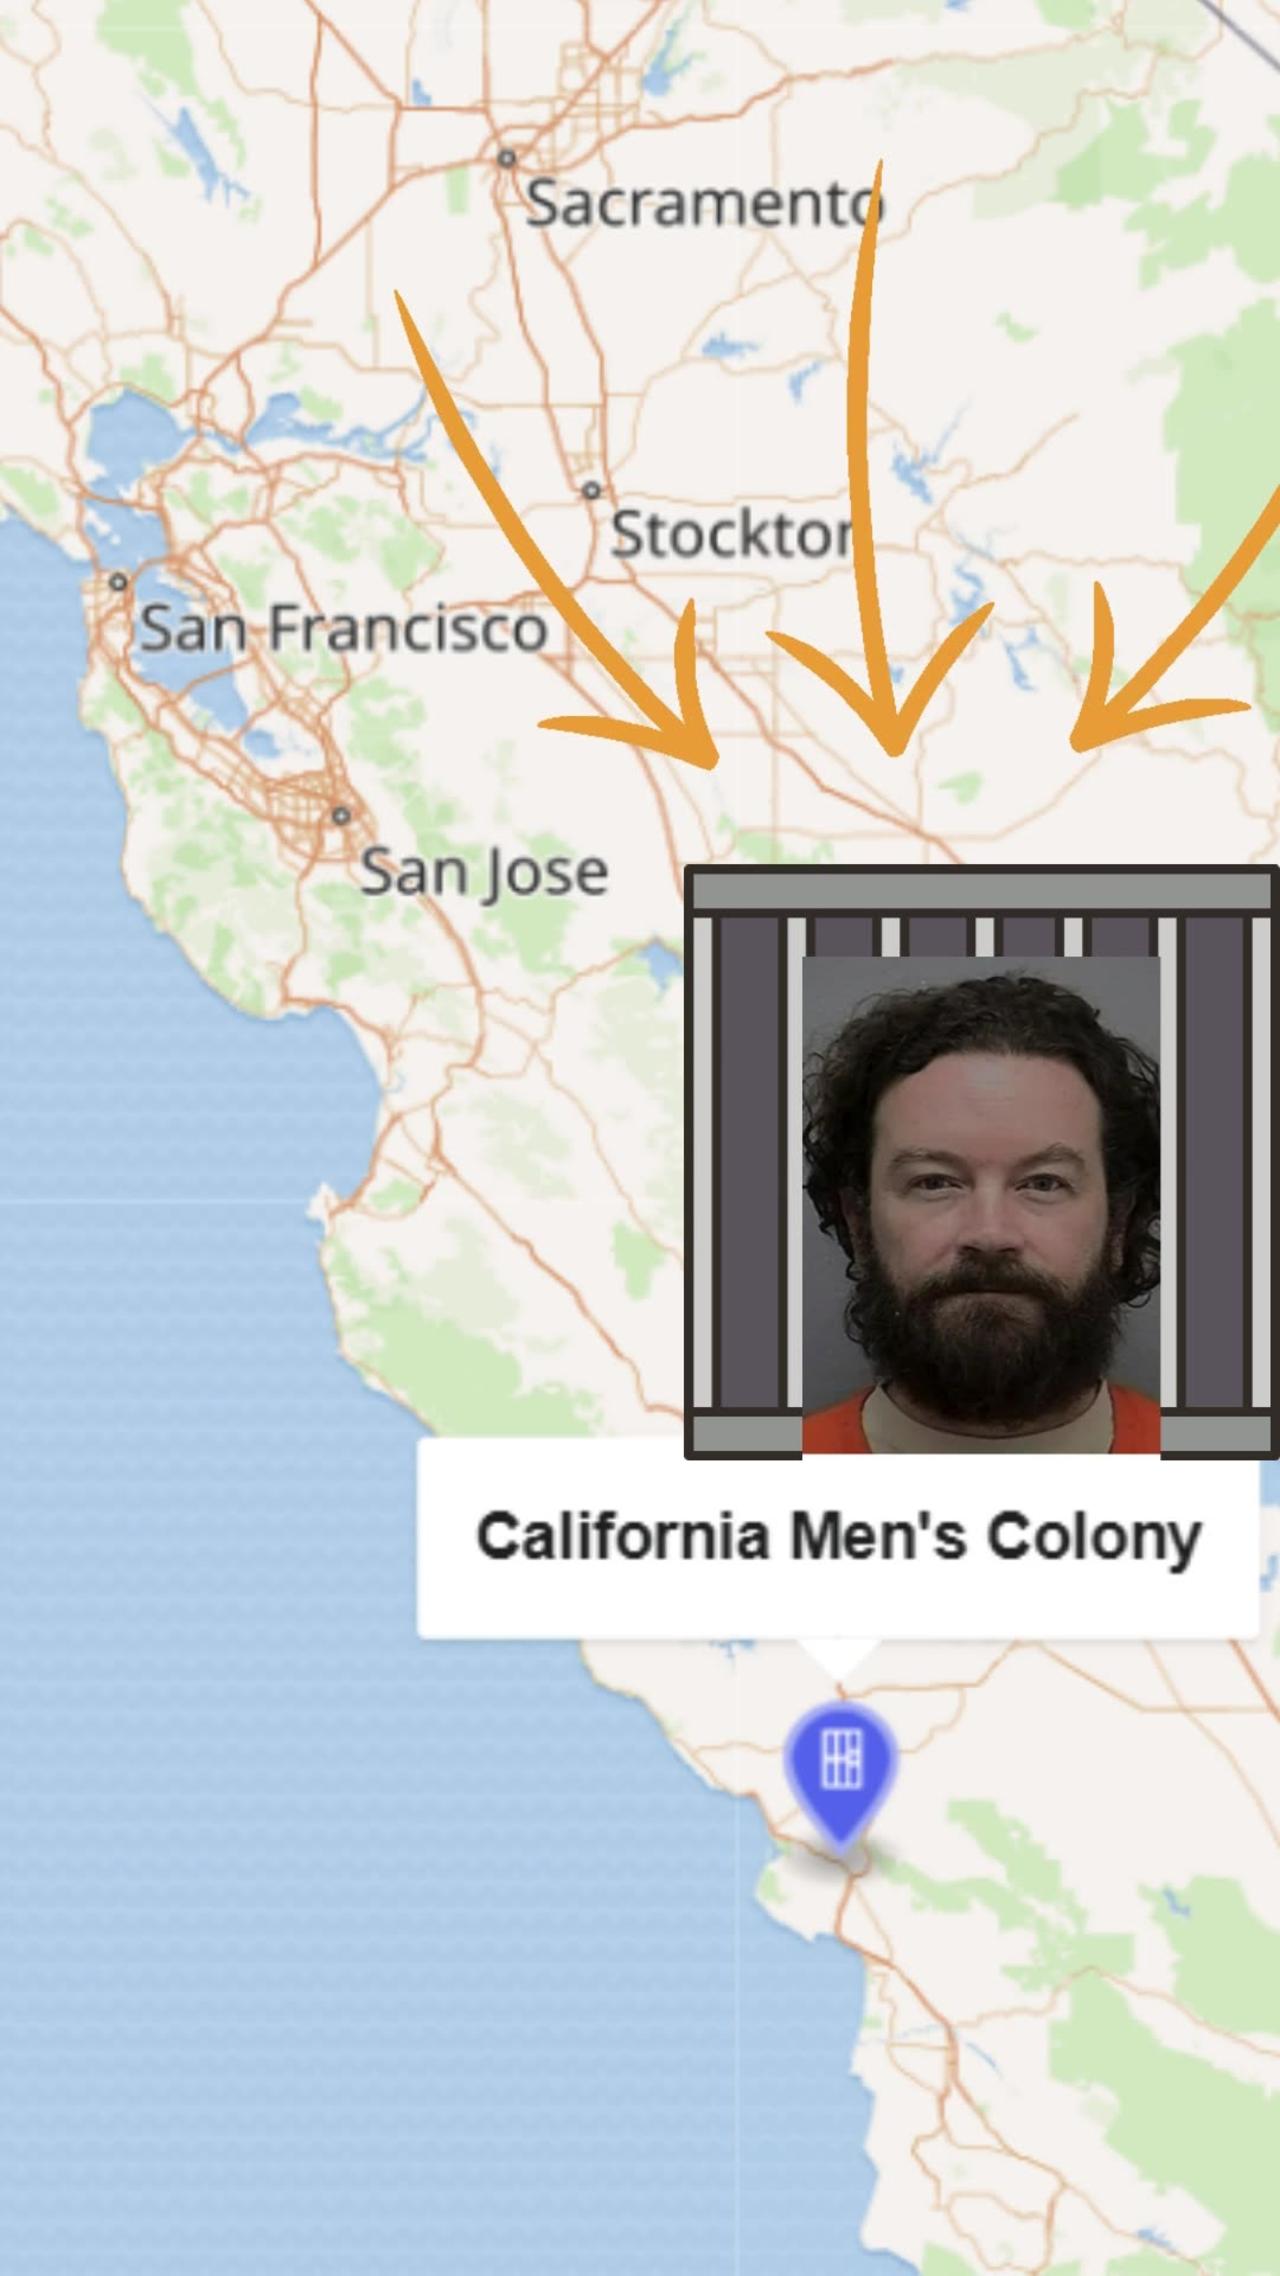 From Max to Minimum Security: Did "That 70s Show" Star Danny Masterson Score a Jailhouse Getaway?